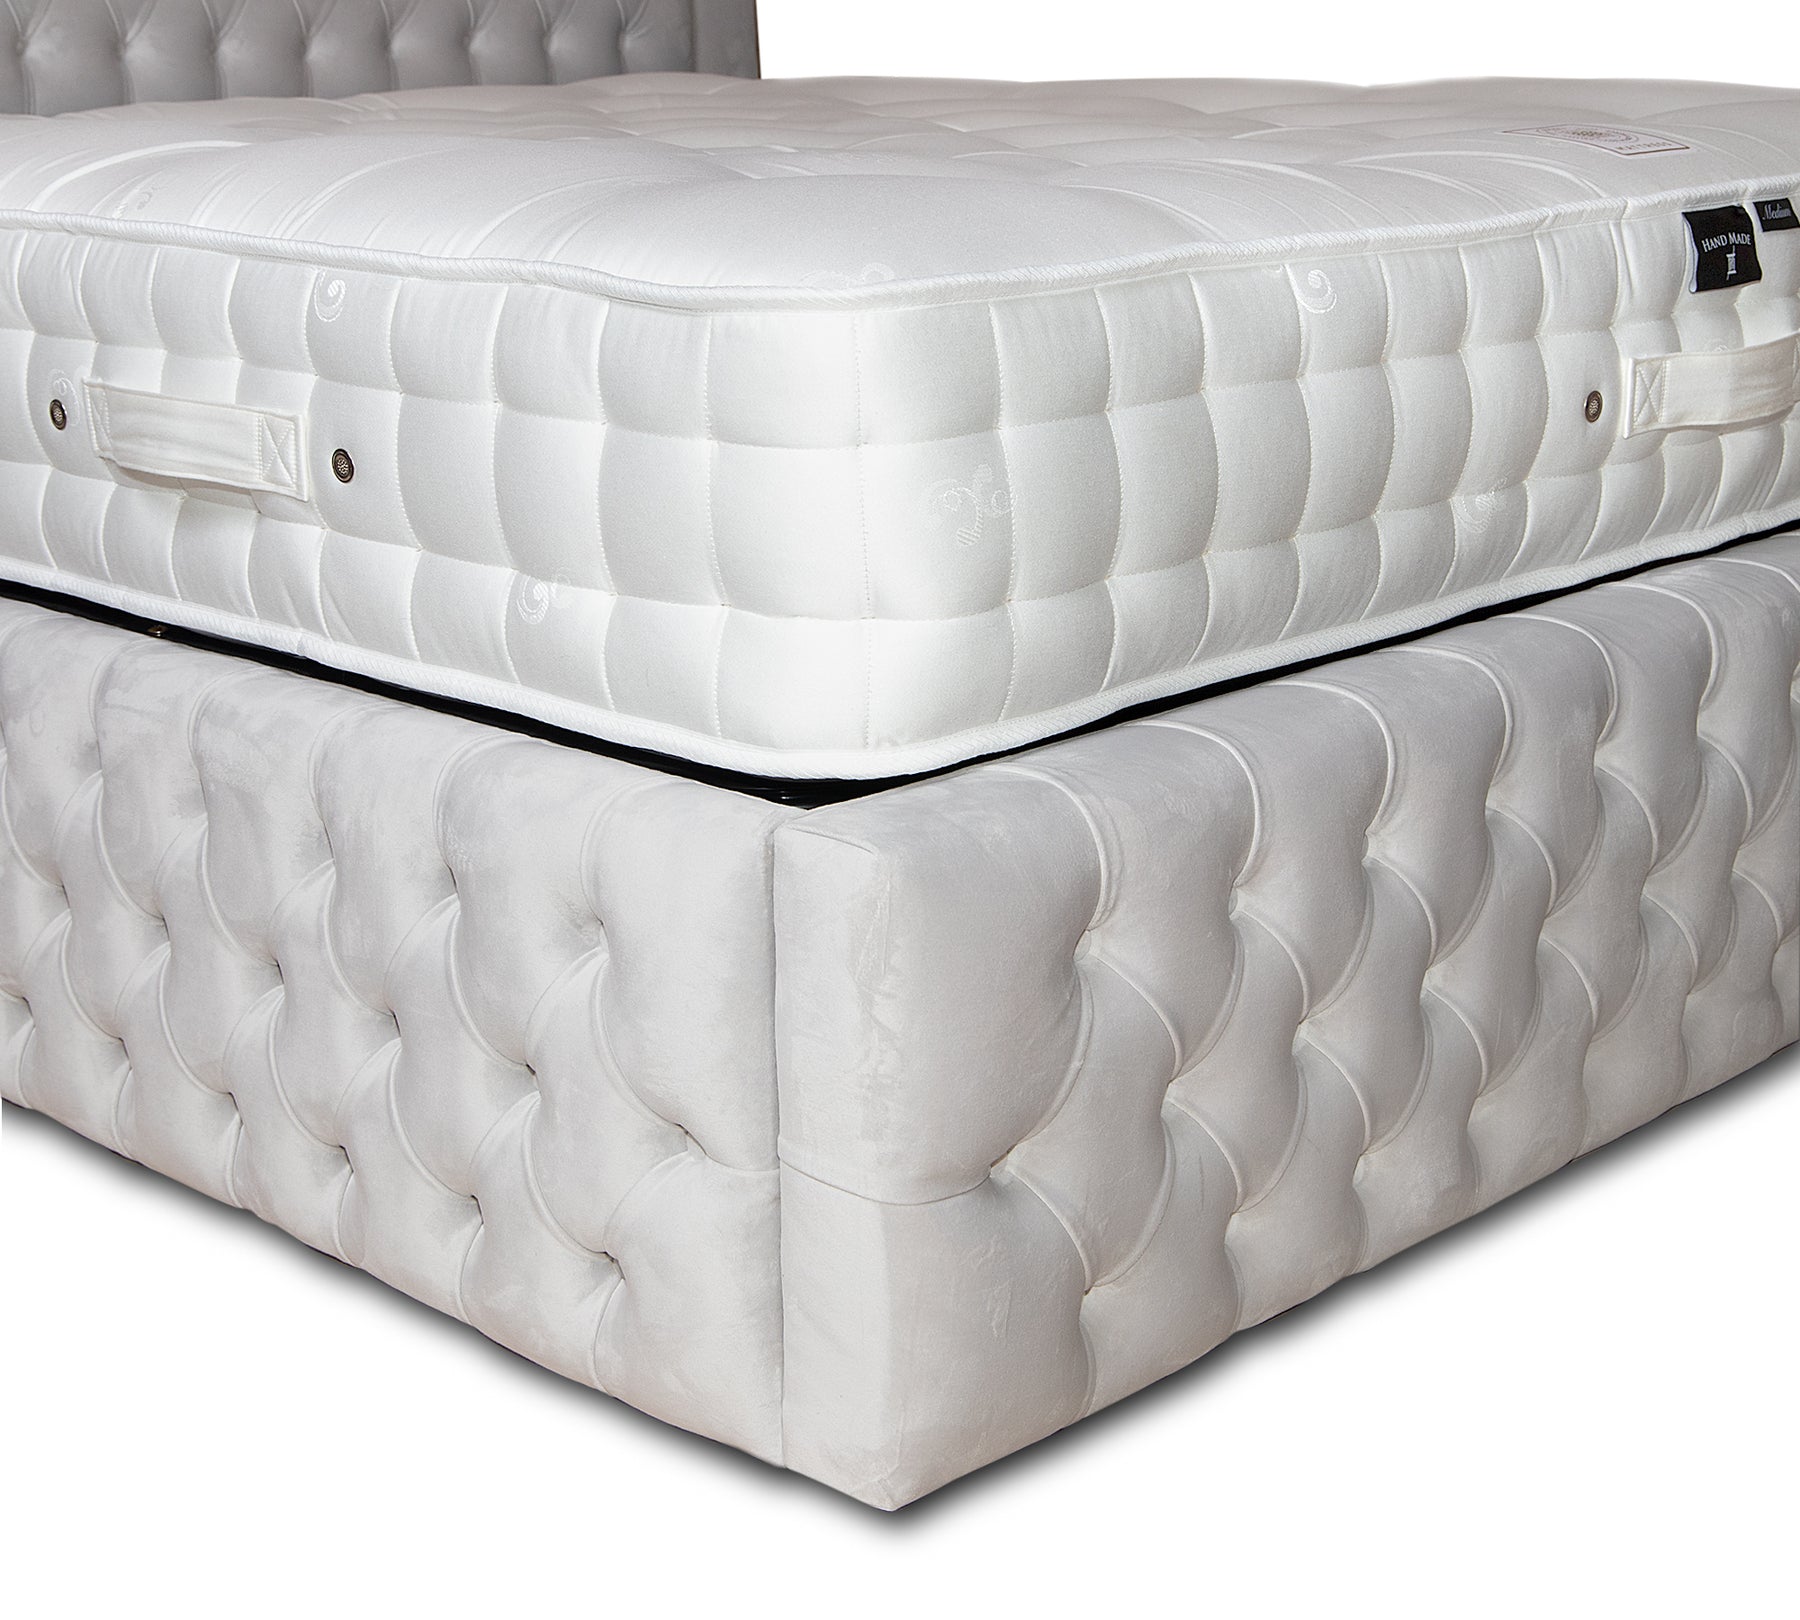 Eminence Chesterfield Bed Frame